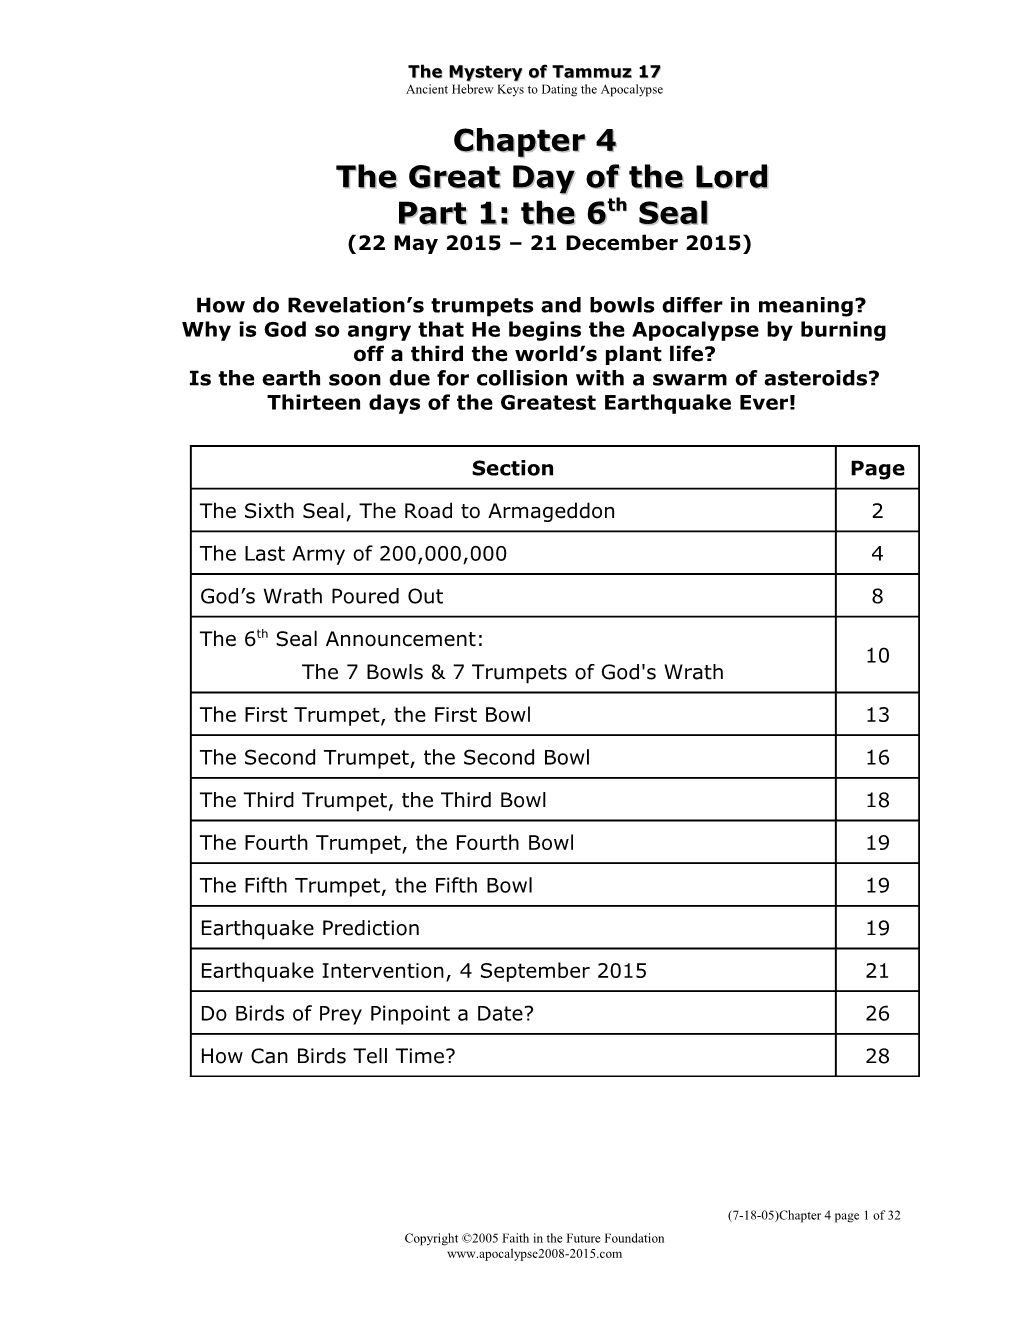 Chapter 4The Great Day of the Lordpart 1: the 6Th Seal